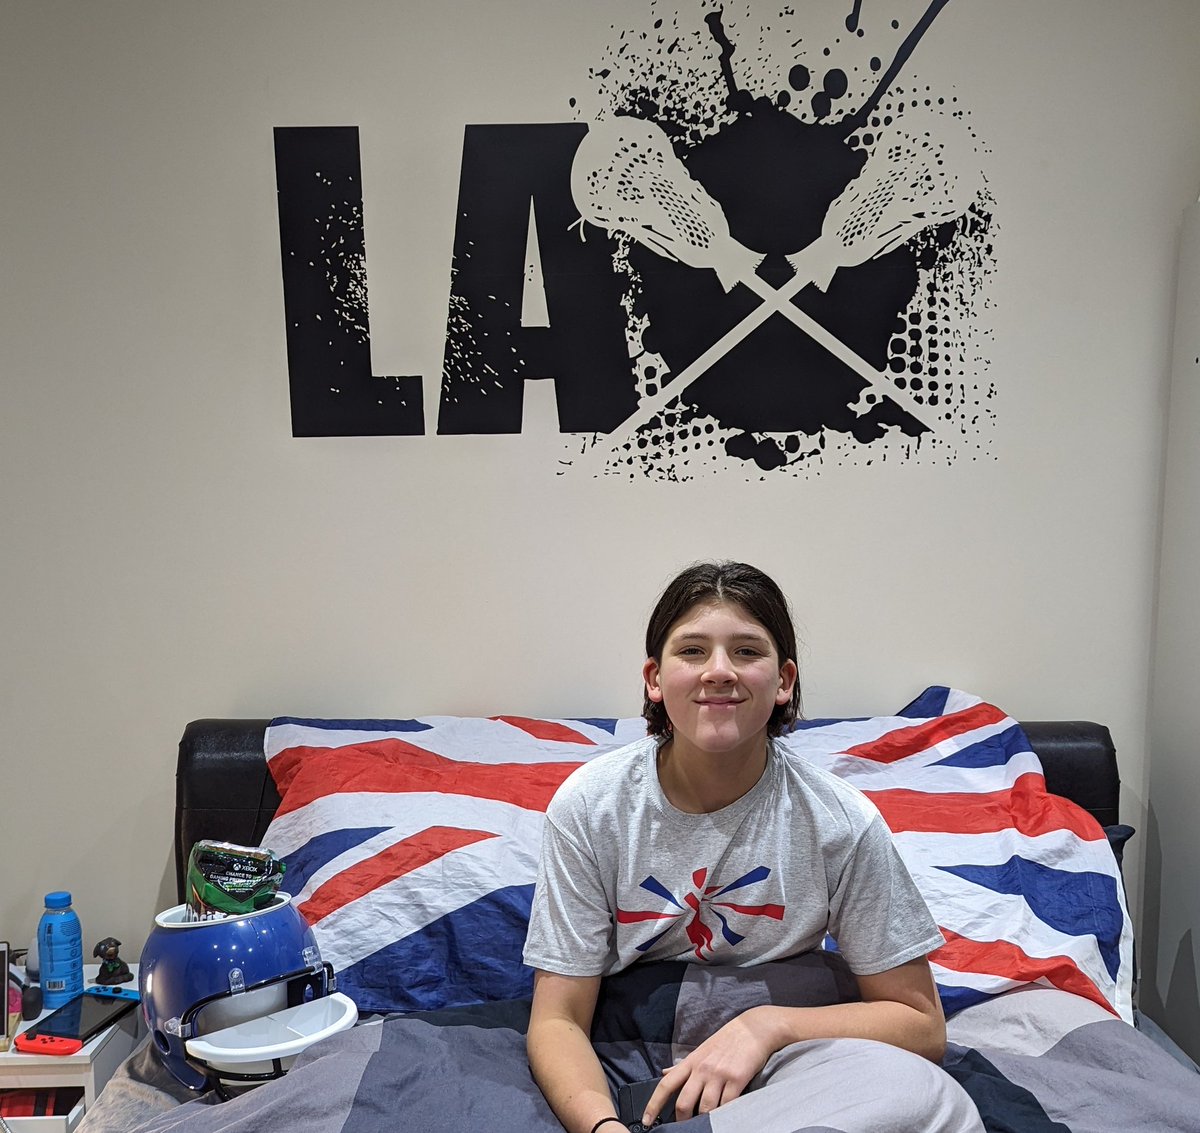 @Doritos in bed when you're up at 05:30 to watch Coach Ben play for @BritishLacrosse in the holidays. Let's hope the next game is on the @HKLAYouTube channel, FB stream isn't good. @lacrosseliveuk2864, they need your expertise 👍